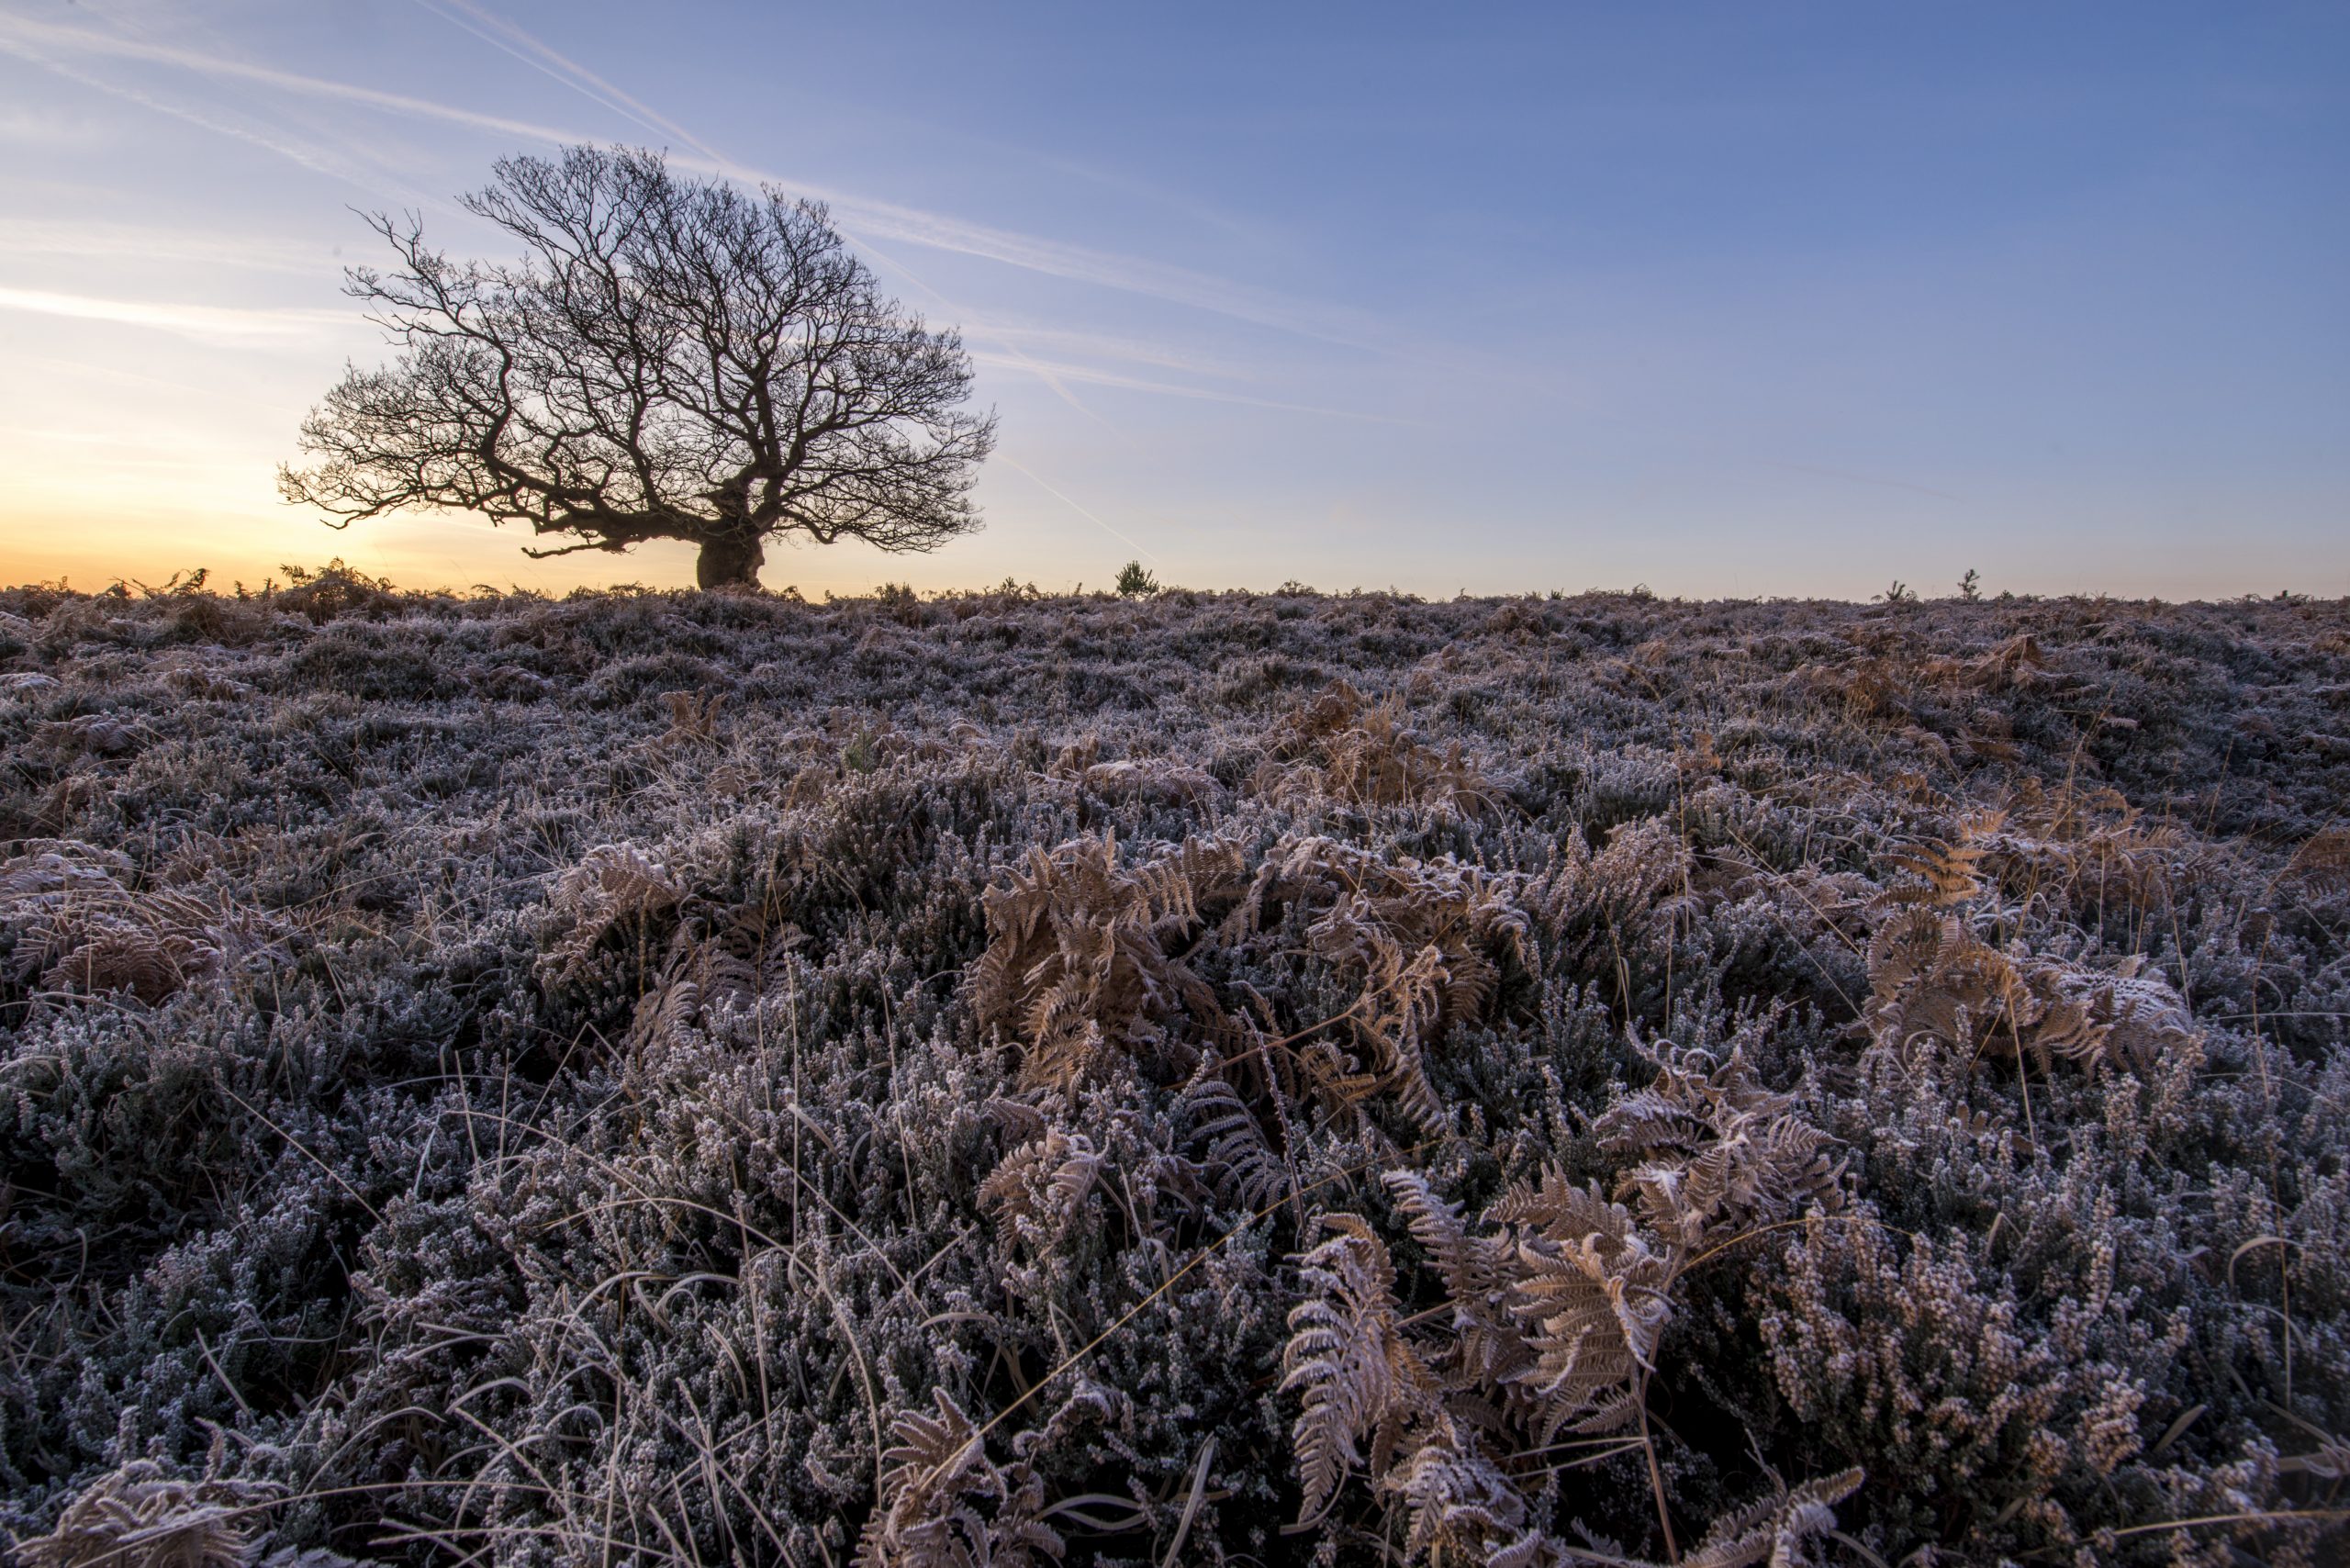 A winter scene in The New Forest showing ferns, trees and sky